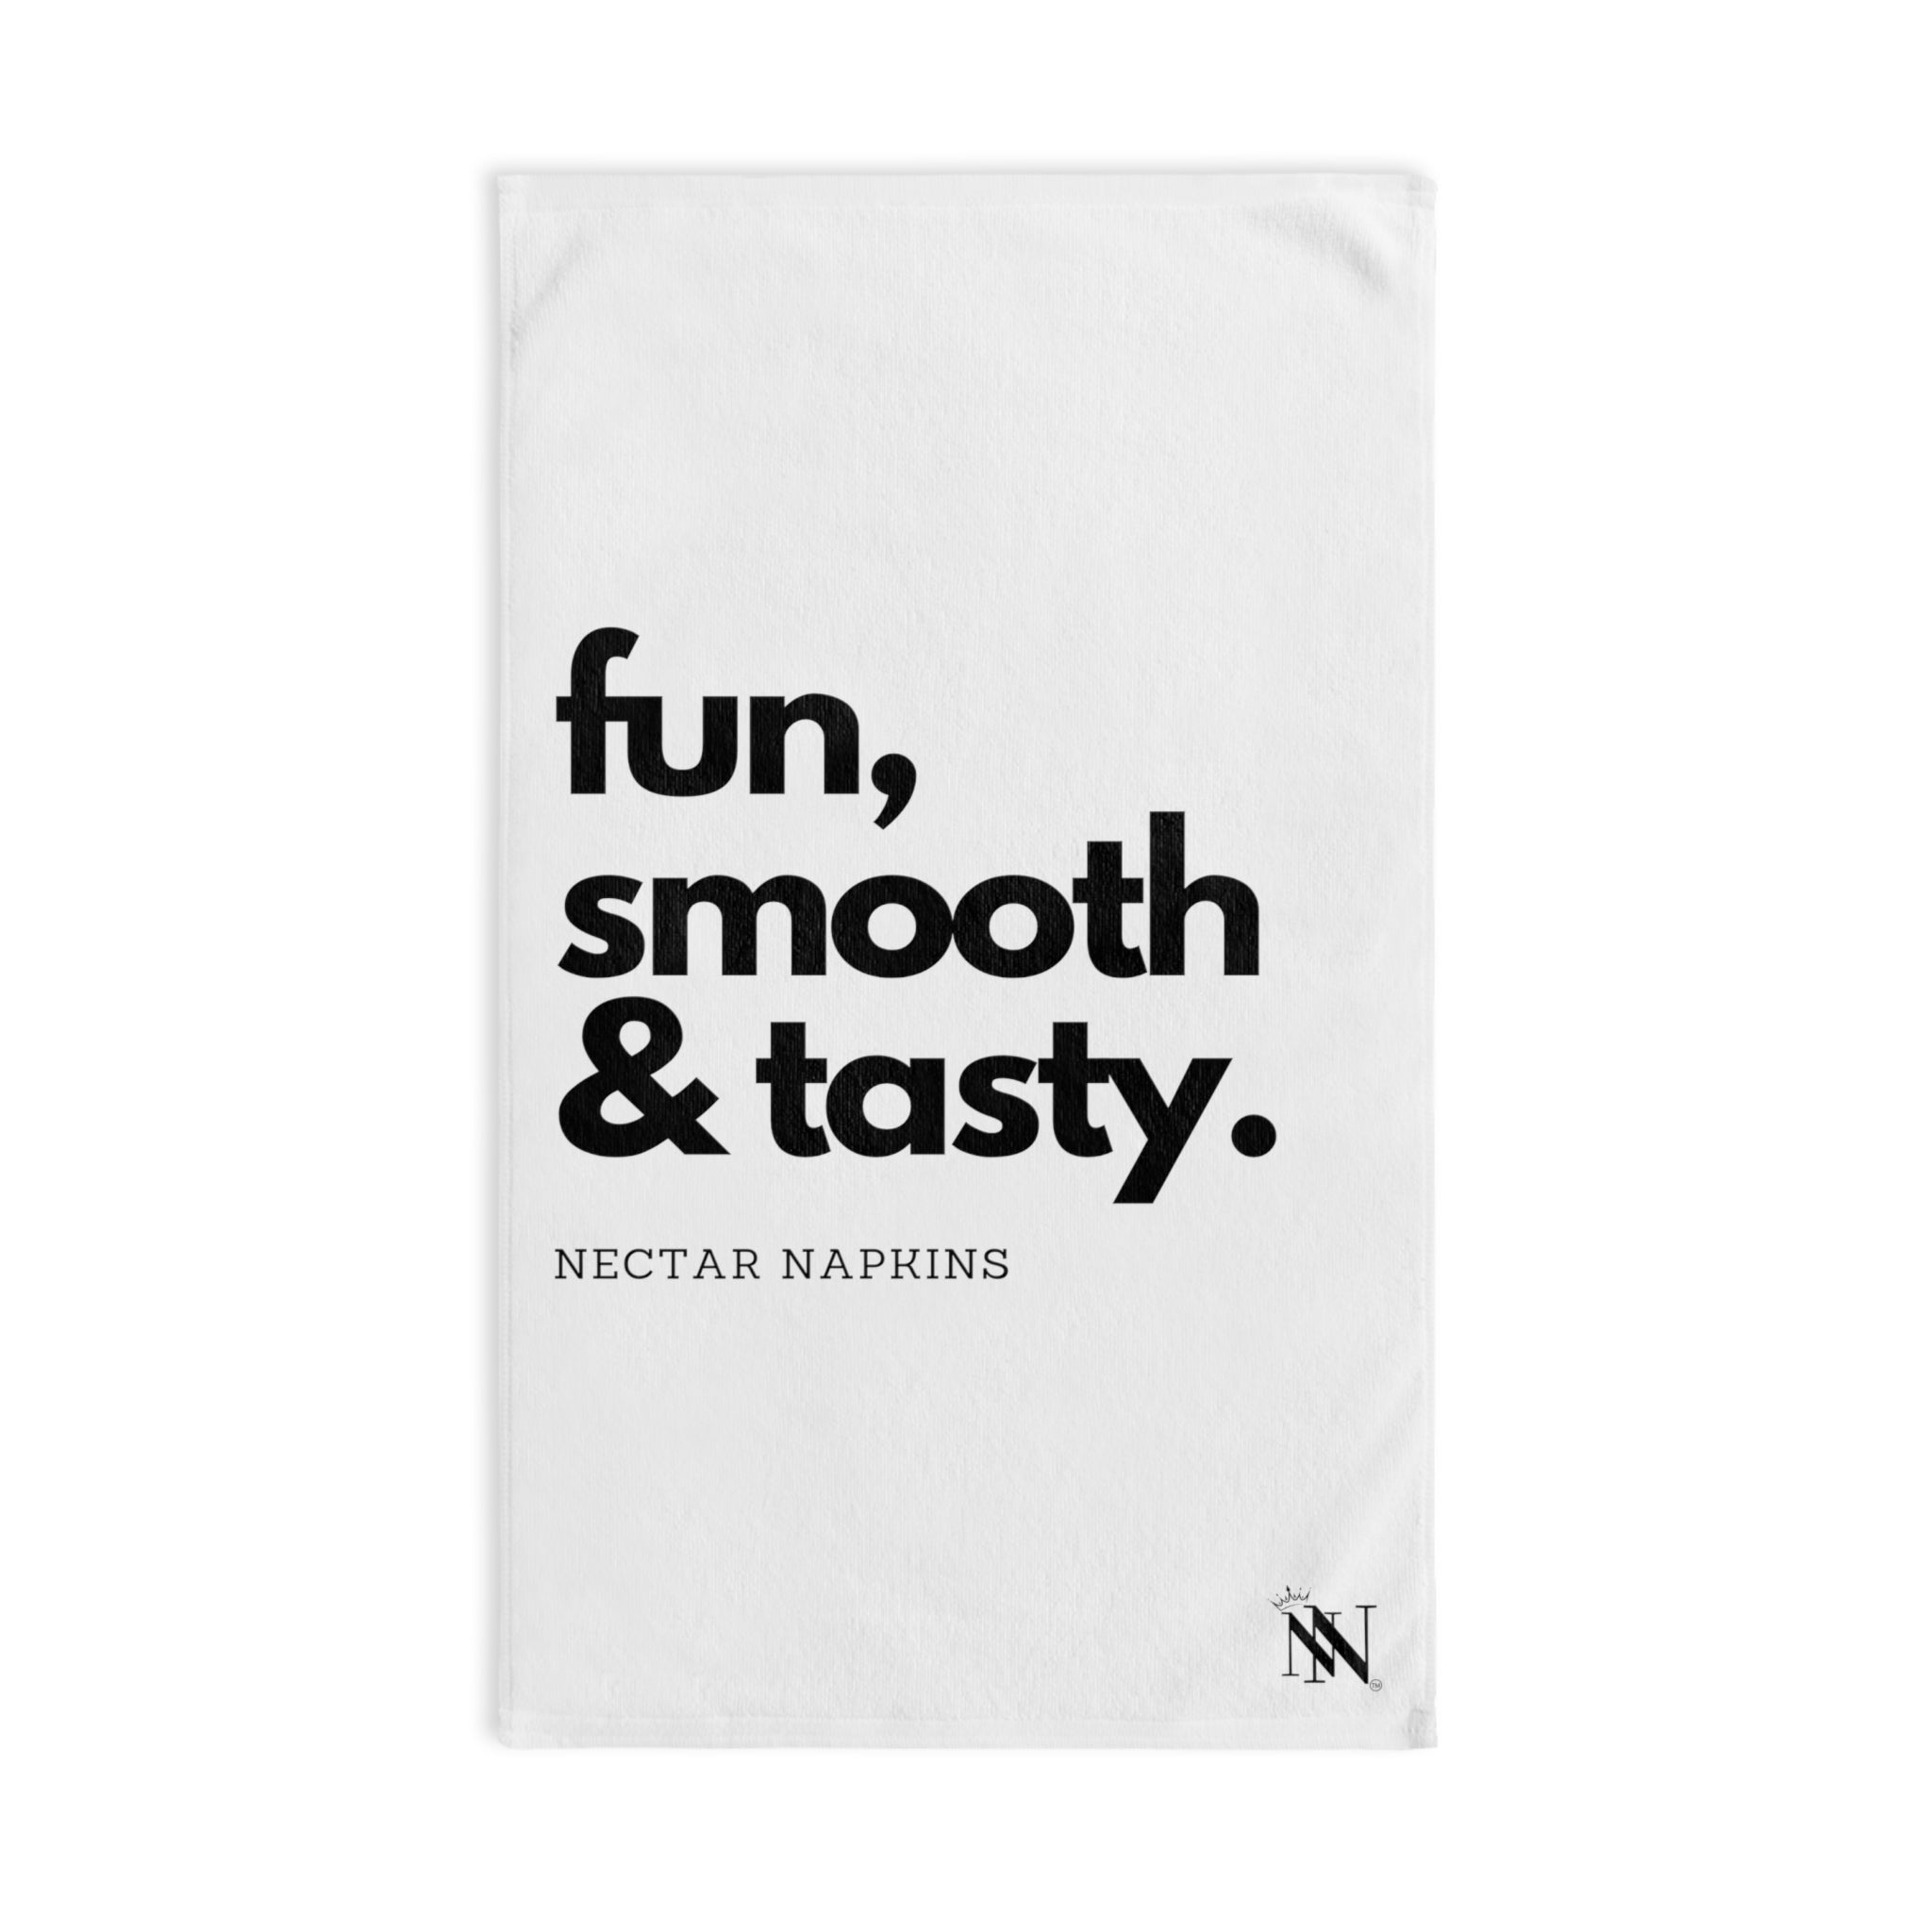 Smooth Tasty White | Funny Gifts for Men - Gifts for Him - Birthday Gifts for Men, Him, Her, Husband, Boyfriend, Girlfriend, New Couple Gifts, Fathers & Valentines Day Gifts, Christmas Gifts NECTAR NAPKINS